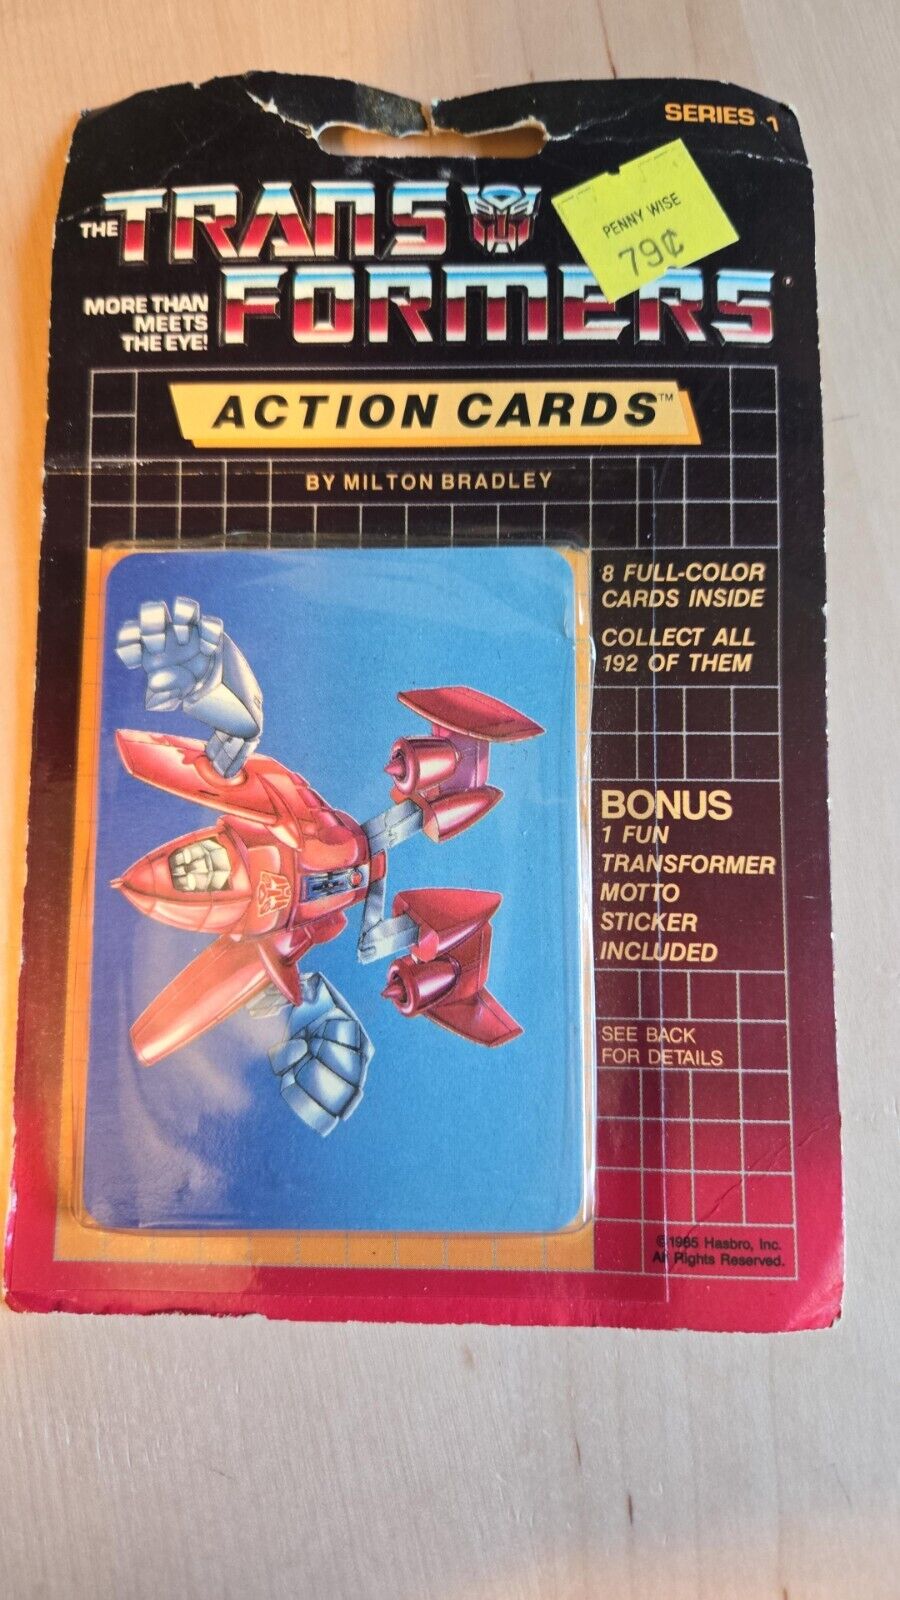 1985 Hasbro Transformers Action Cards Sealed Pack - Powerglide on top